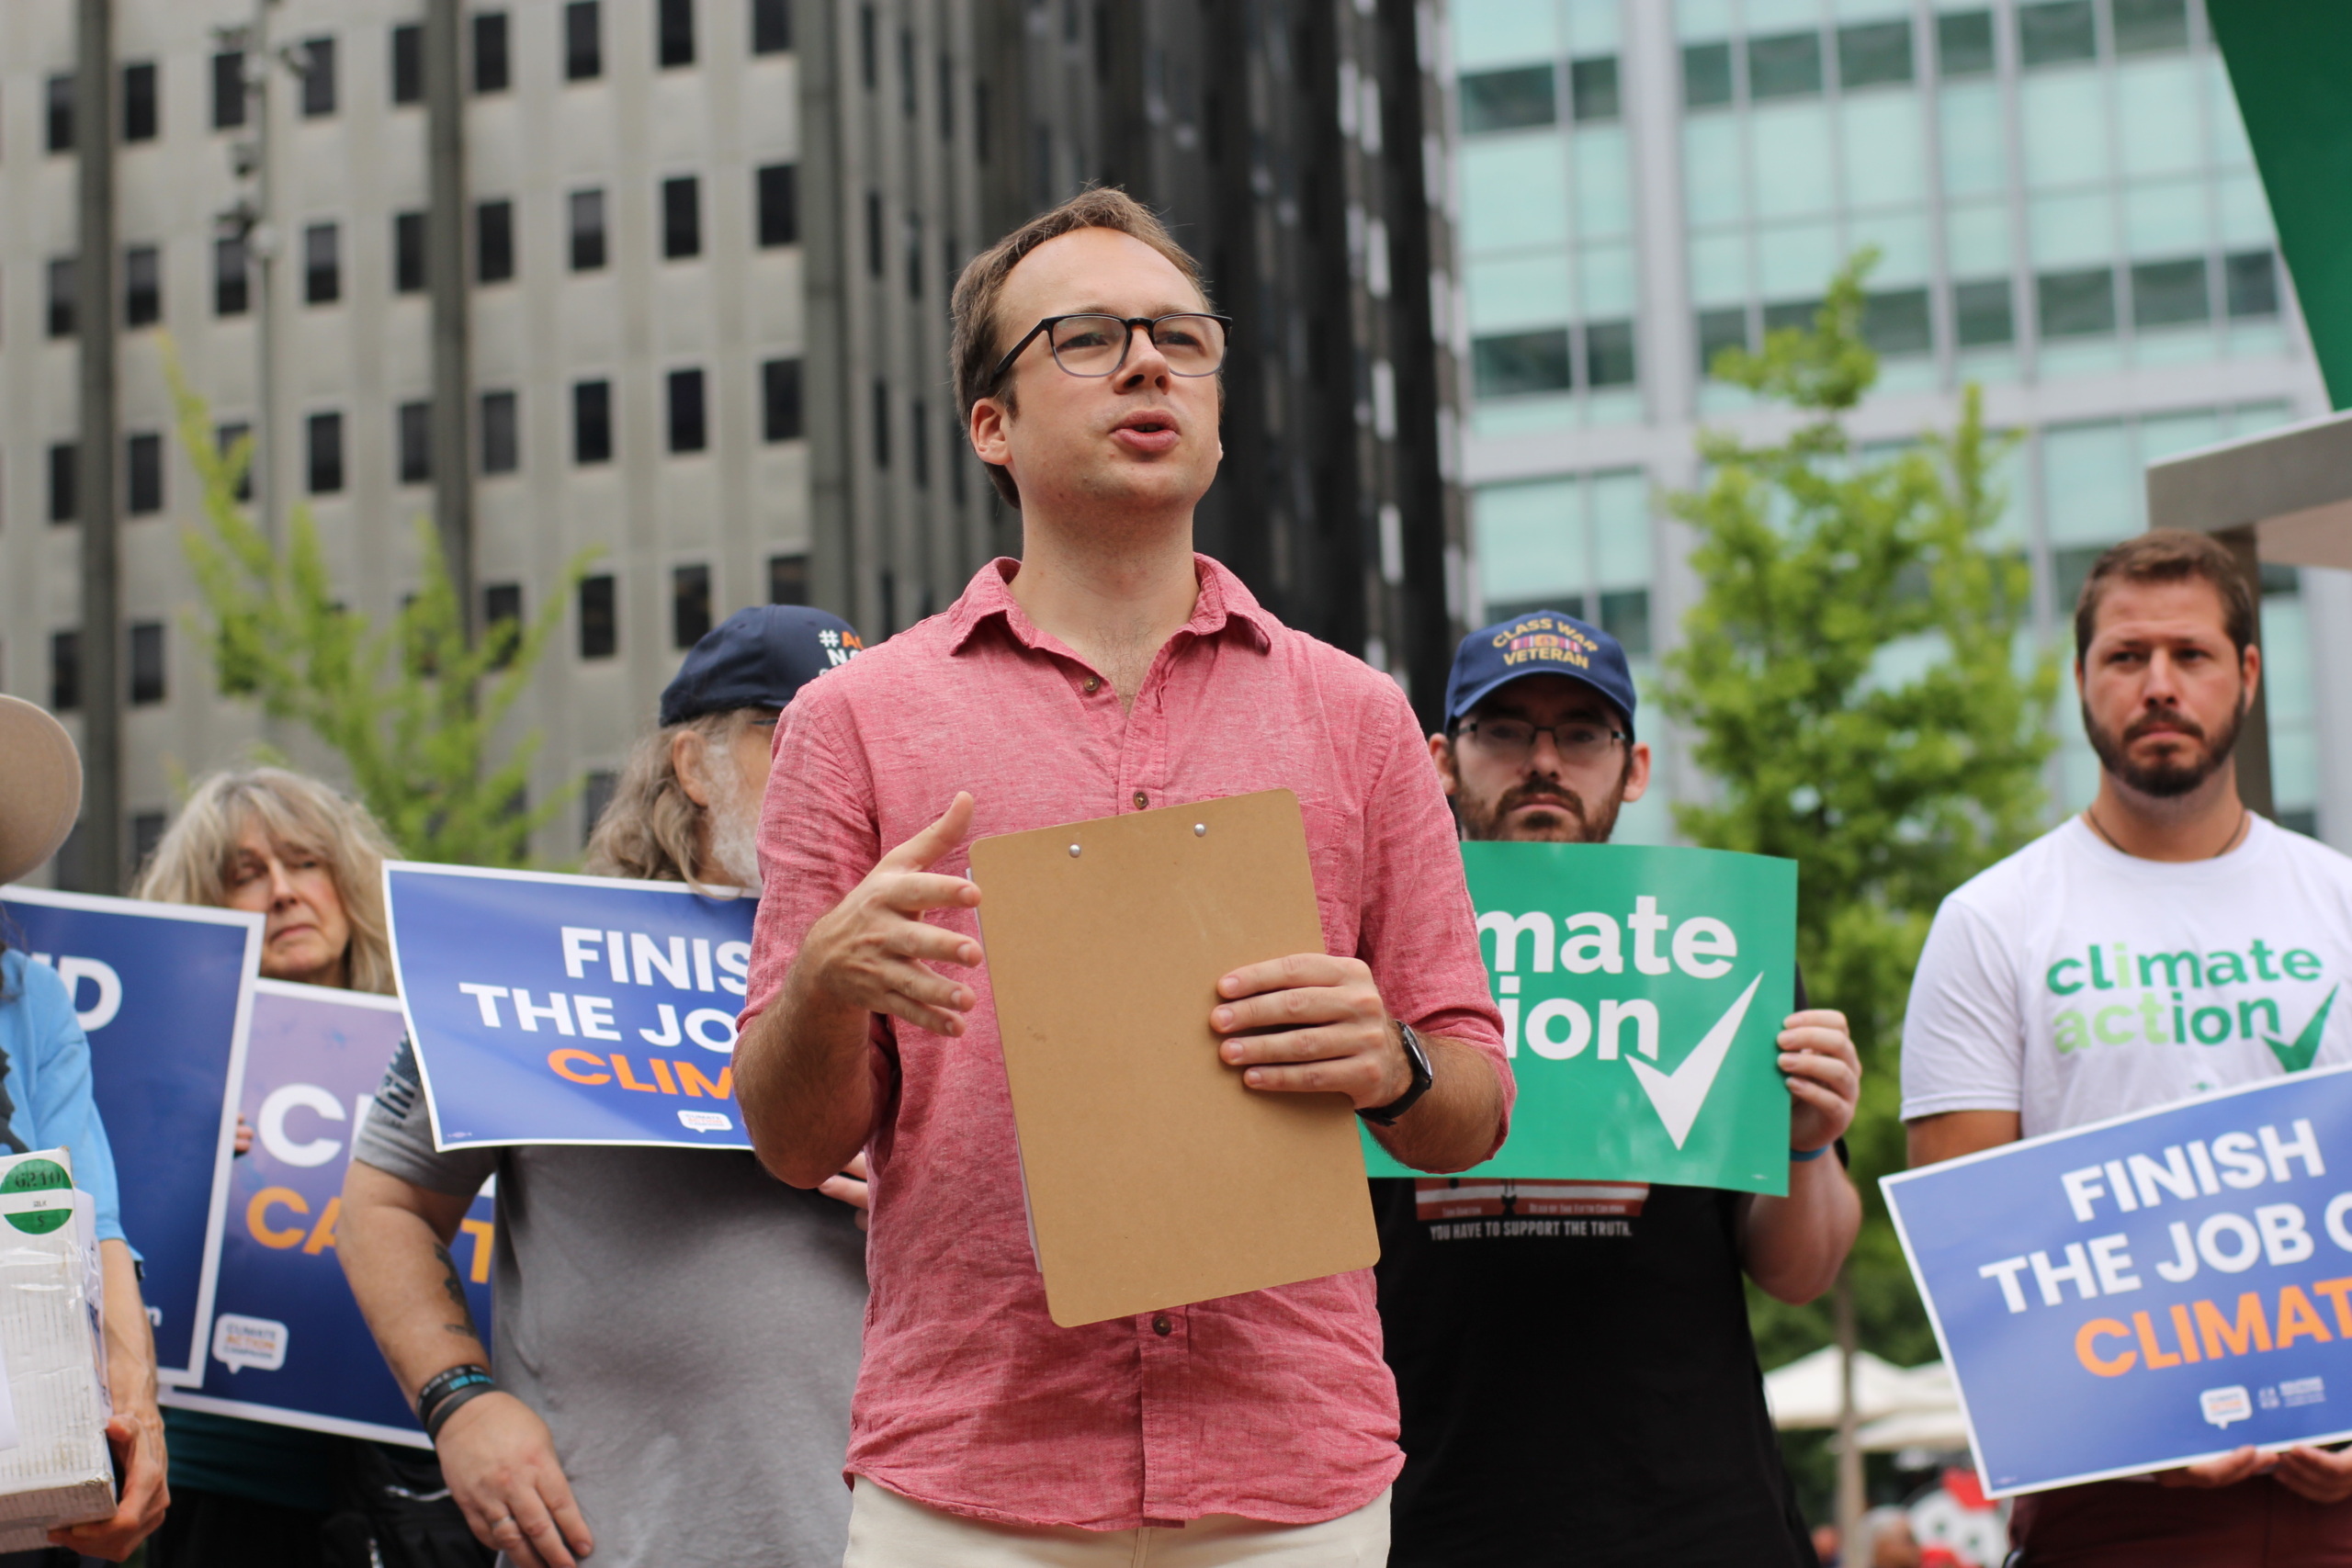 PennEnvironment's Zachary Barber speaks at climate rally